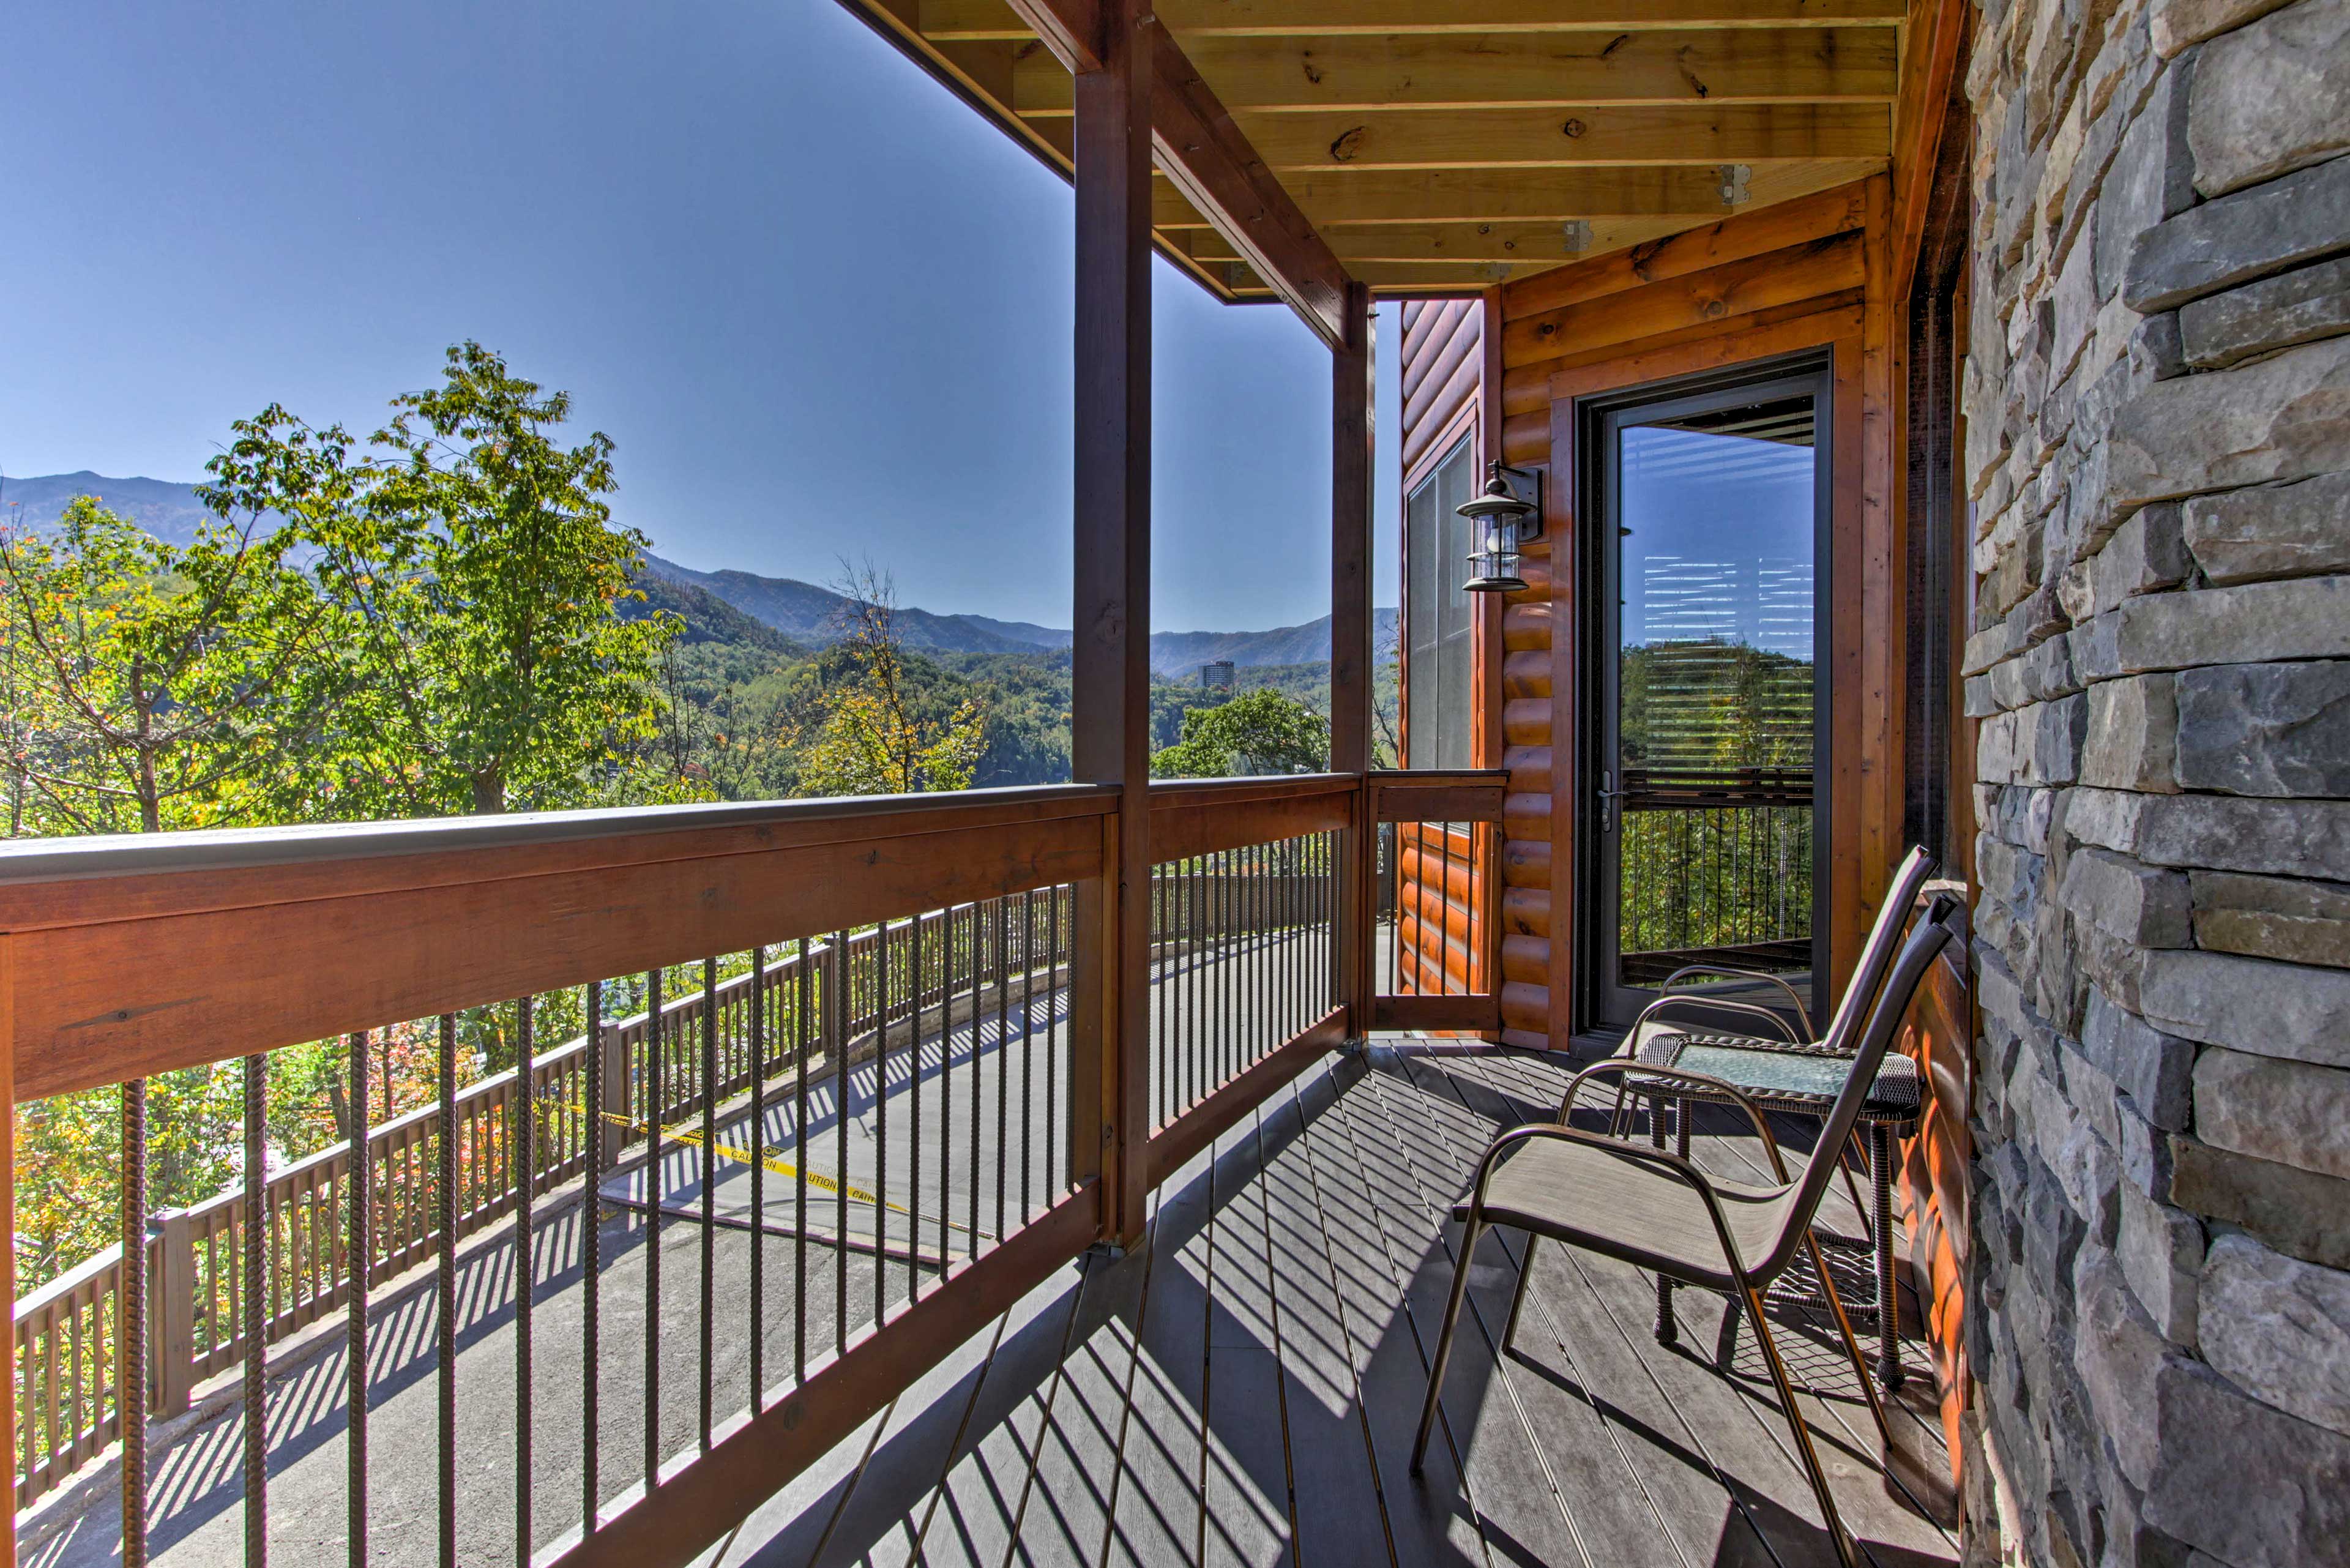 Gatlinburg Vacation Rental | 5BR | 5.5BA | 4,000 Sq Ft | Stairs Required